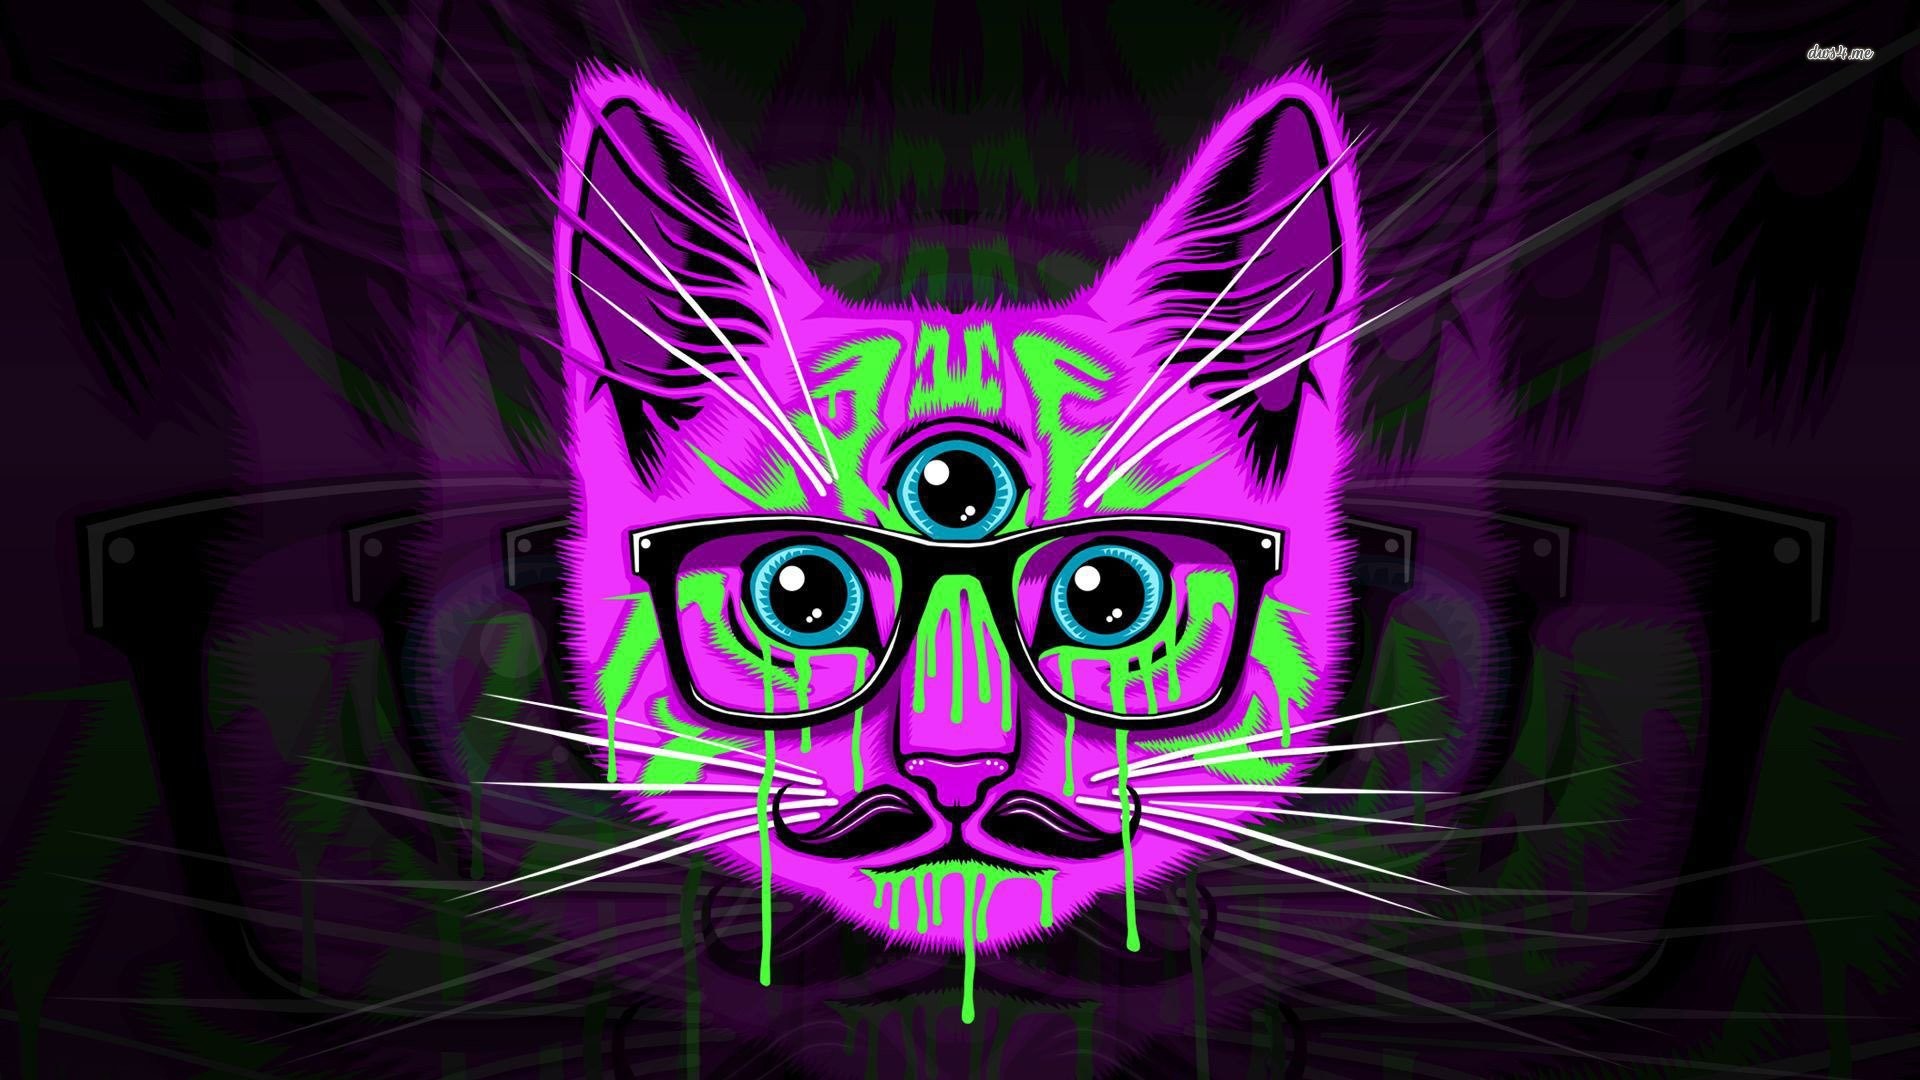 Hipster Cat wallpaper for iphone